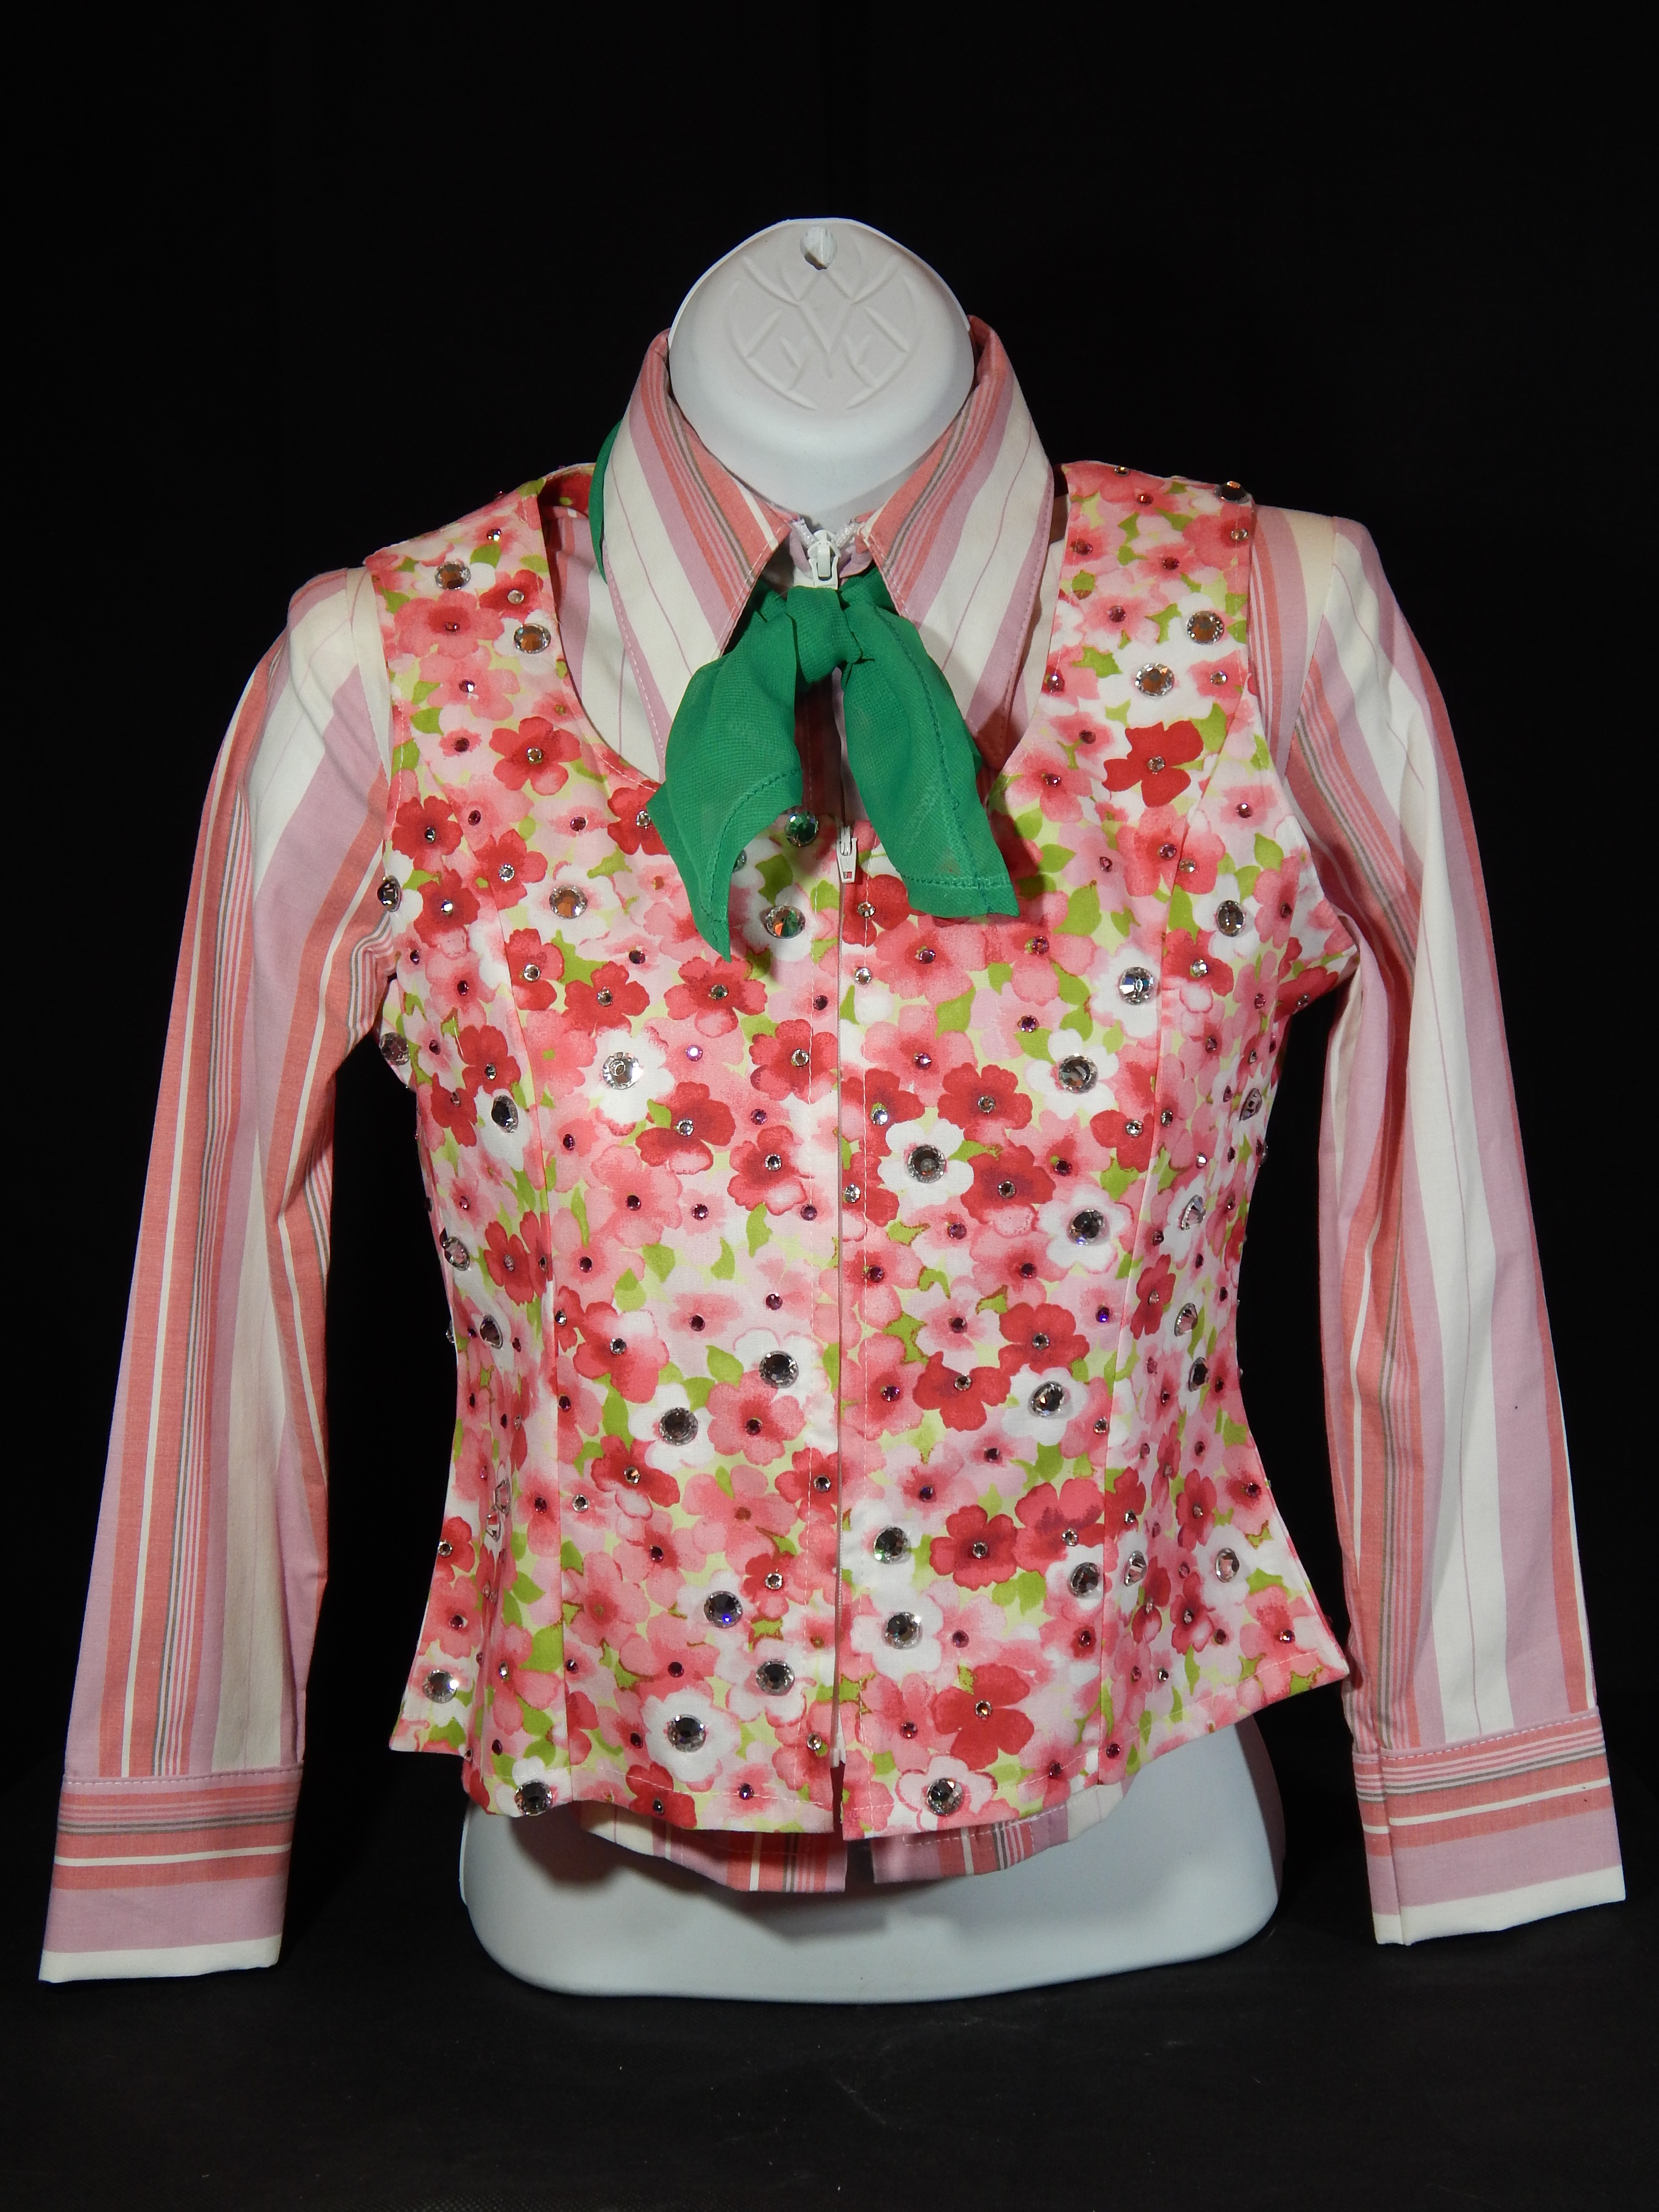 MKC YOUTH Horse Show Vest - White, Pink, Red, Green Floral